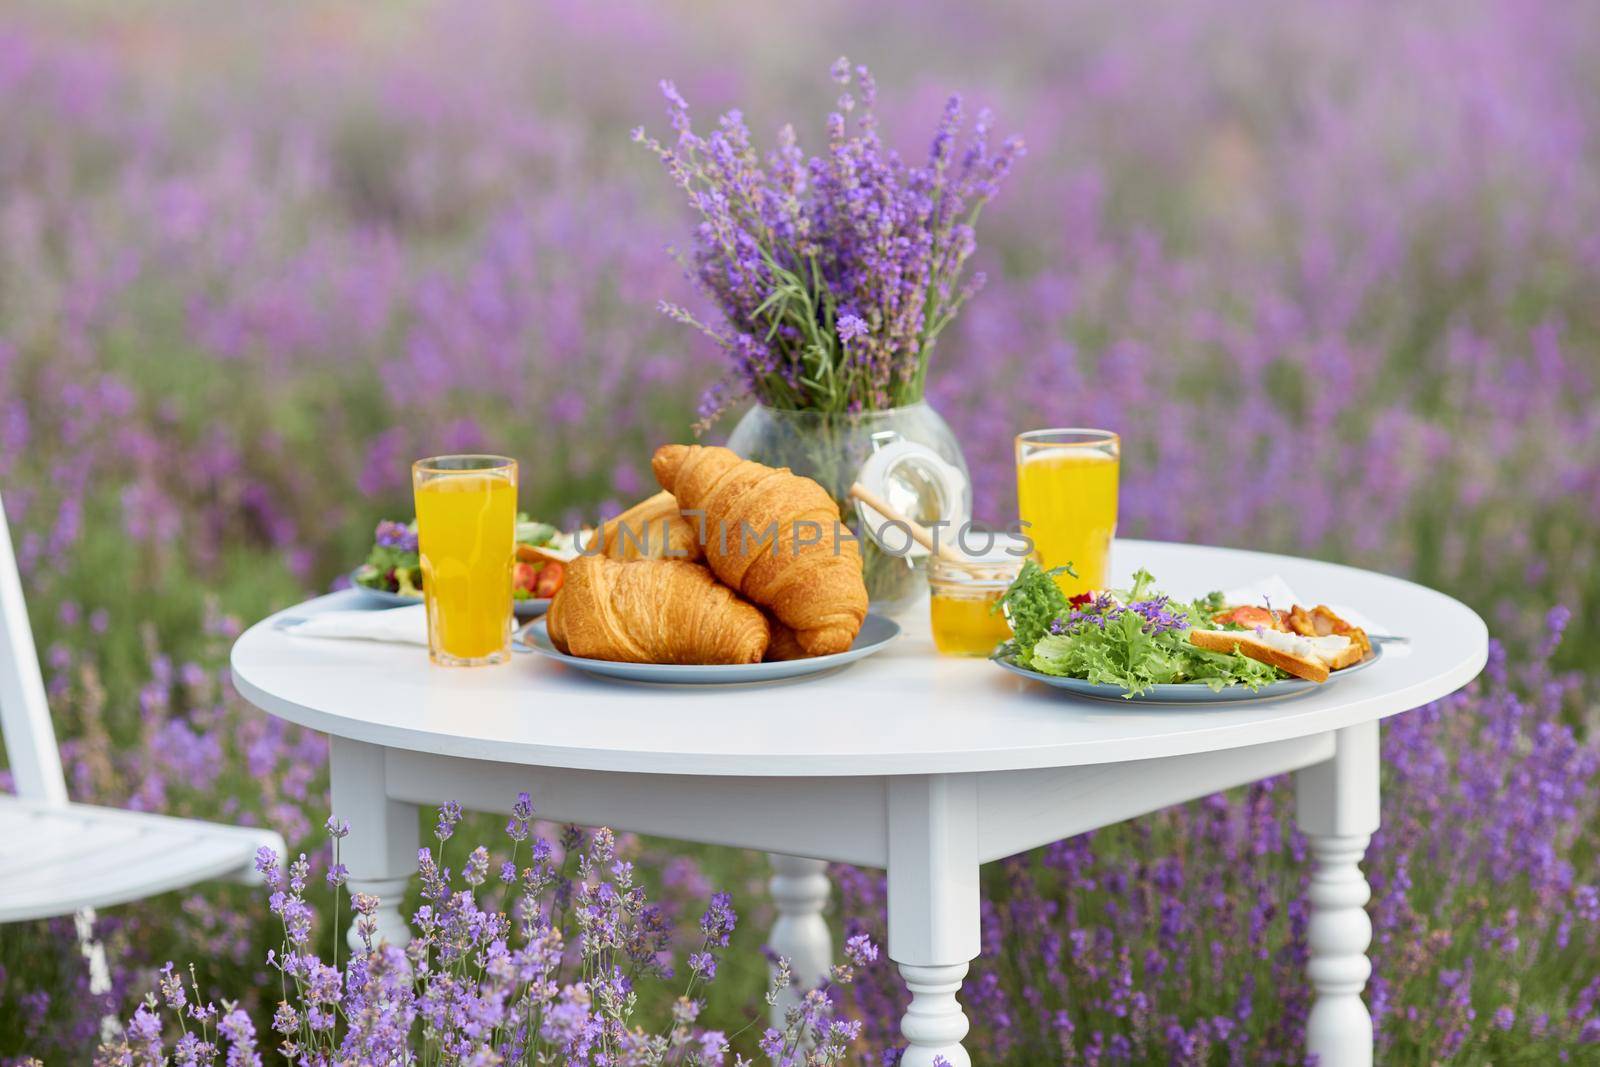 Food served on table in lavender field. by SerhiiBobyk